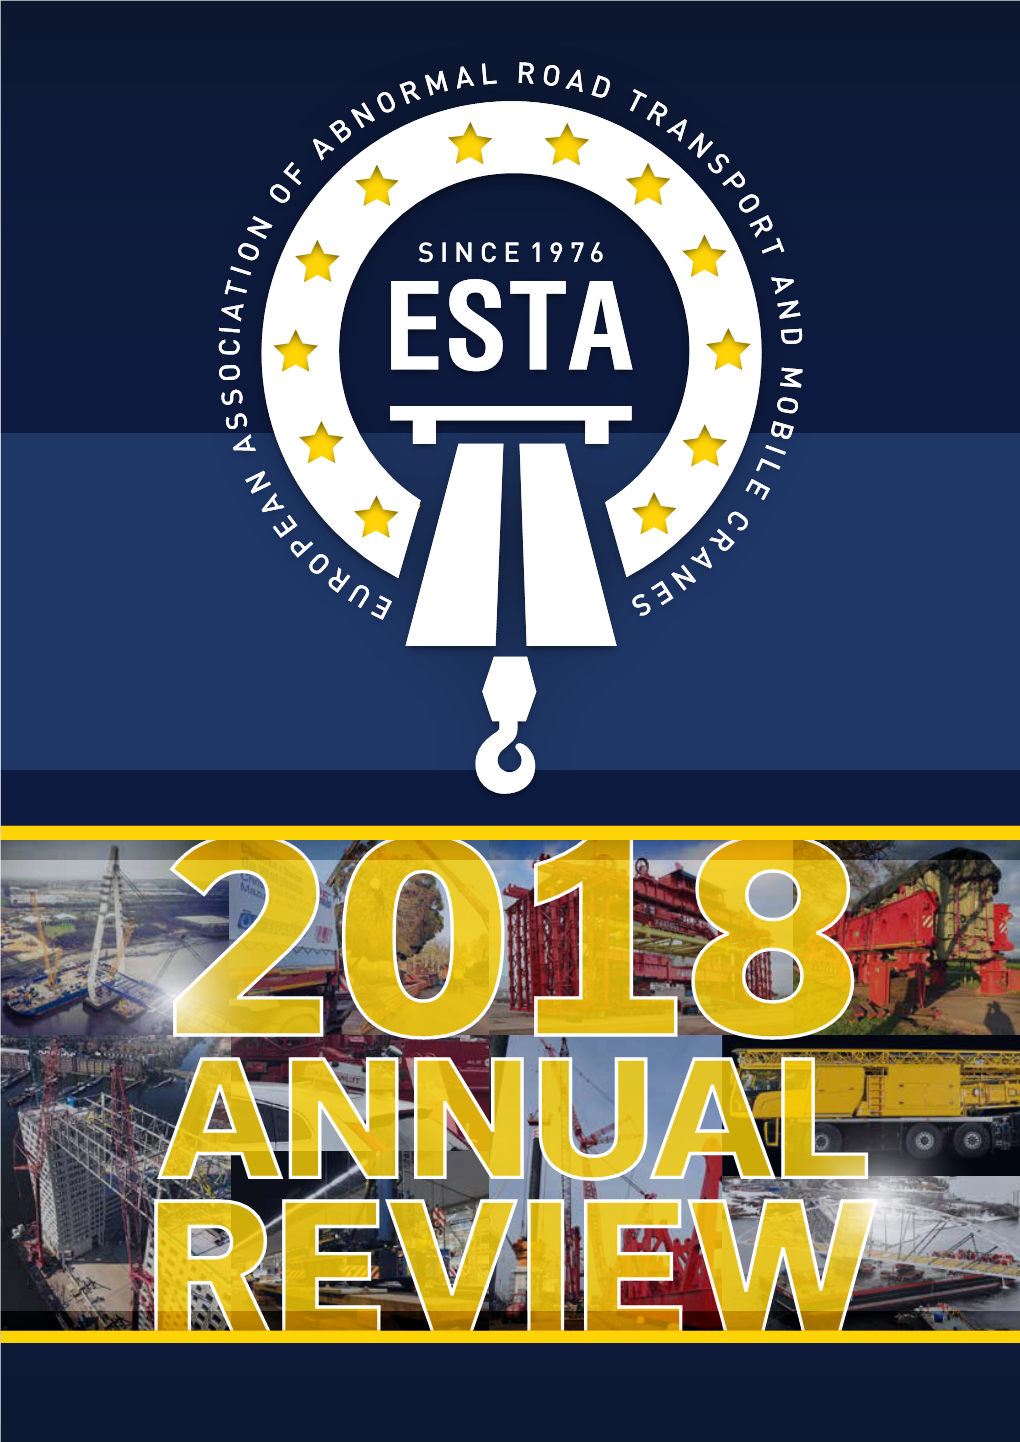 The European Crane Operators Licence Will Be Launched by ESTA in Early 2019